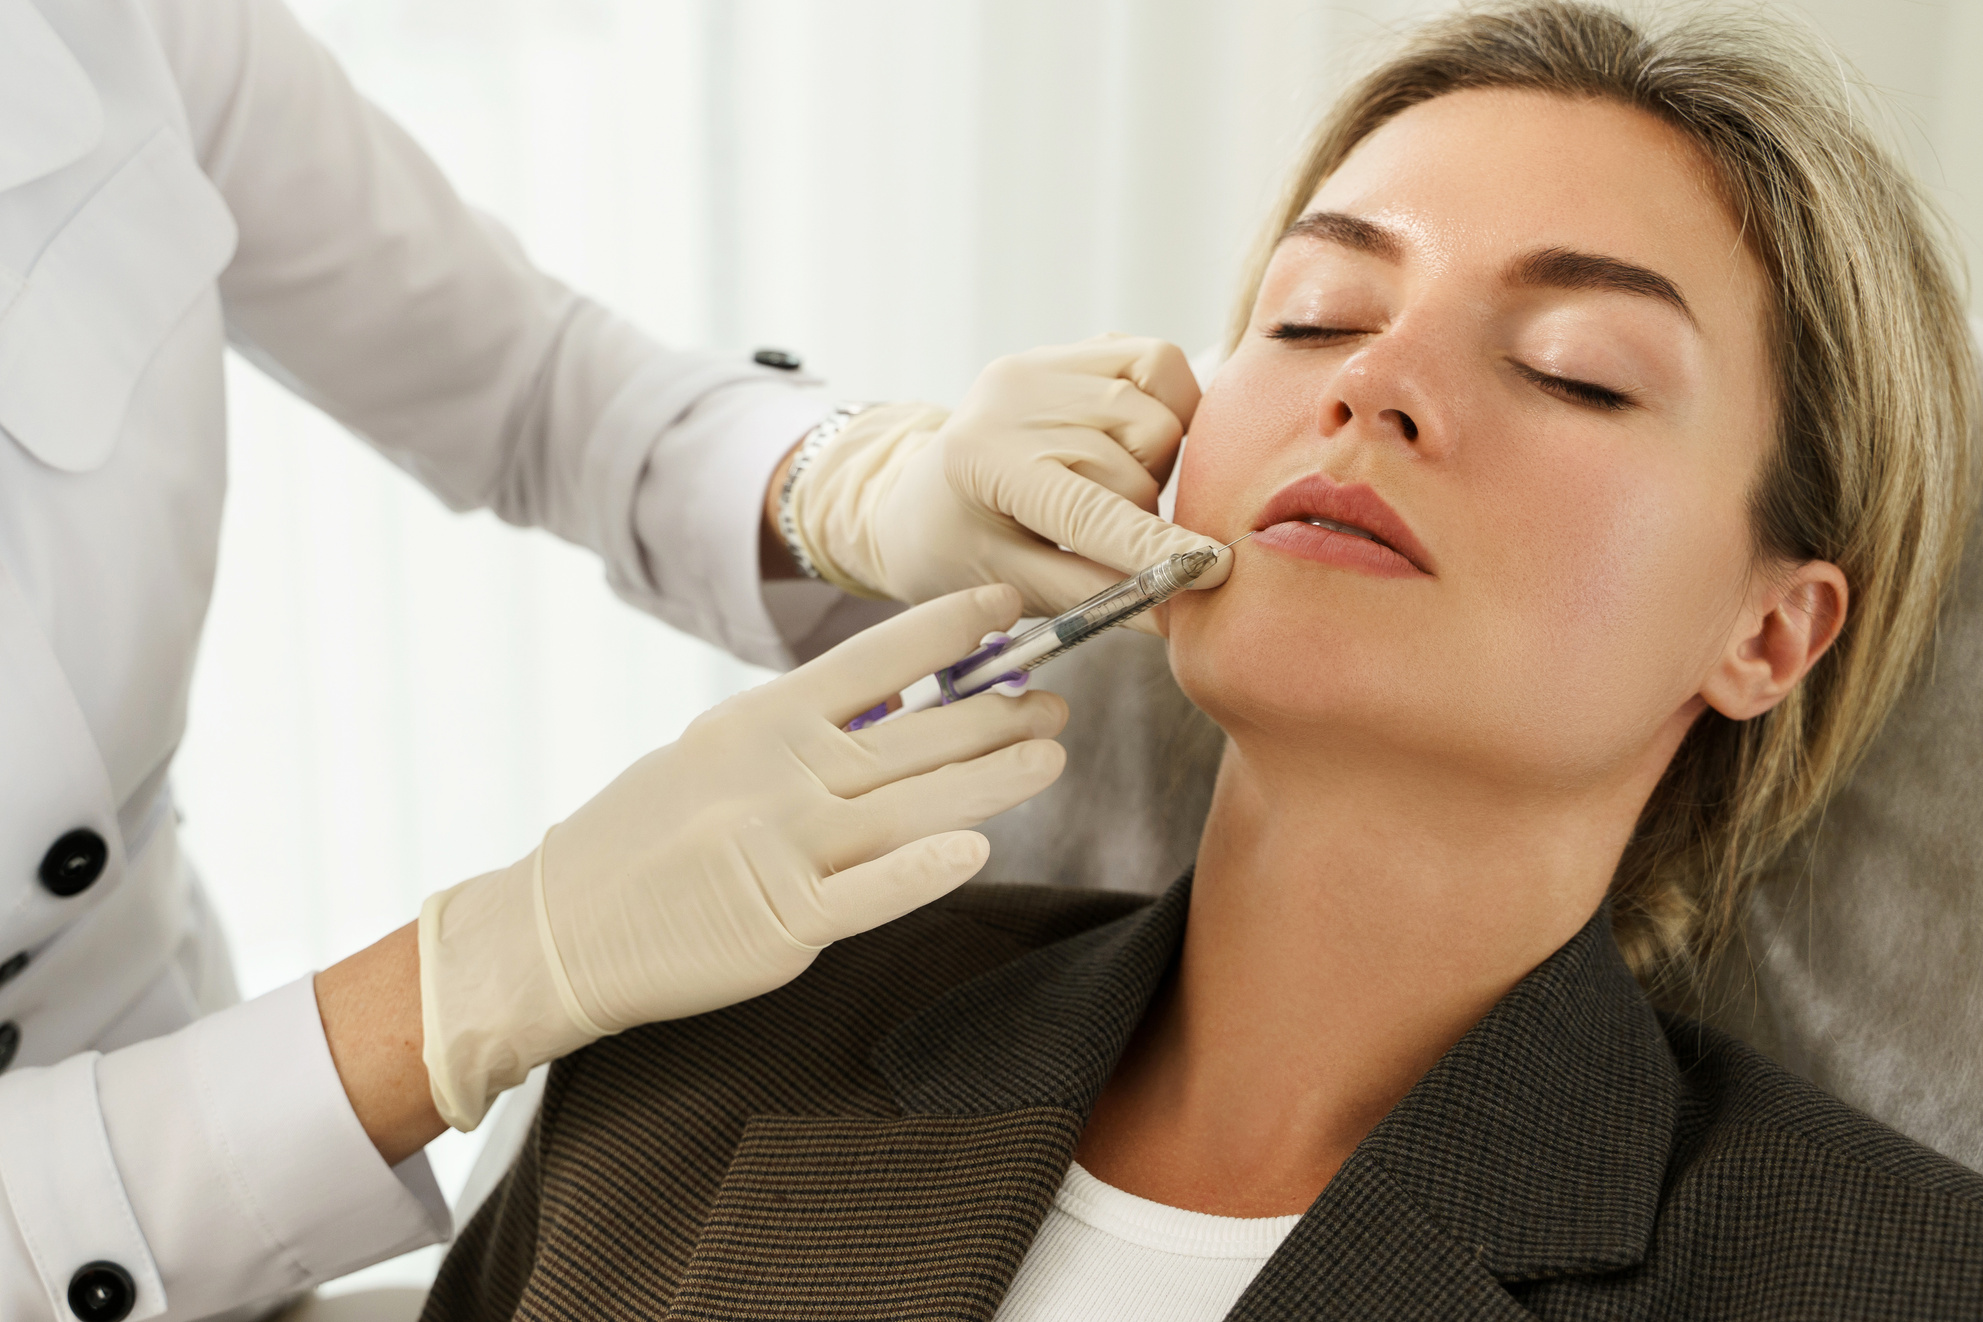 Woman during Facial Filler Injections in Aesthetic Medical Clini